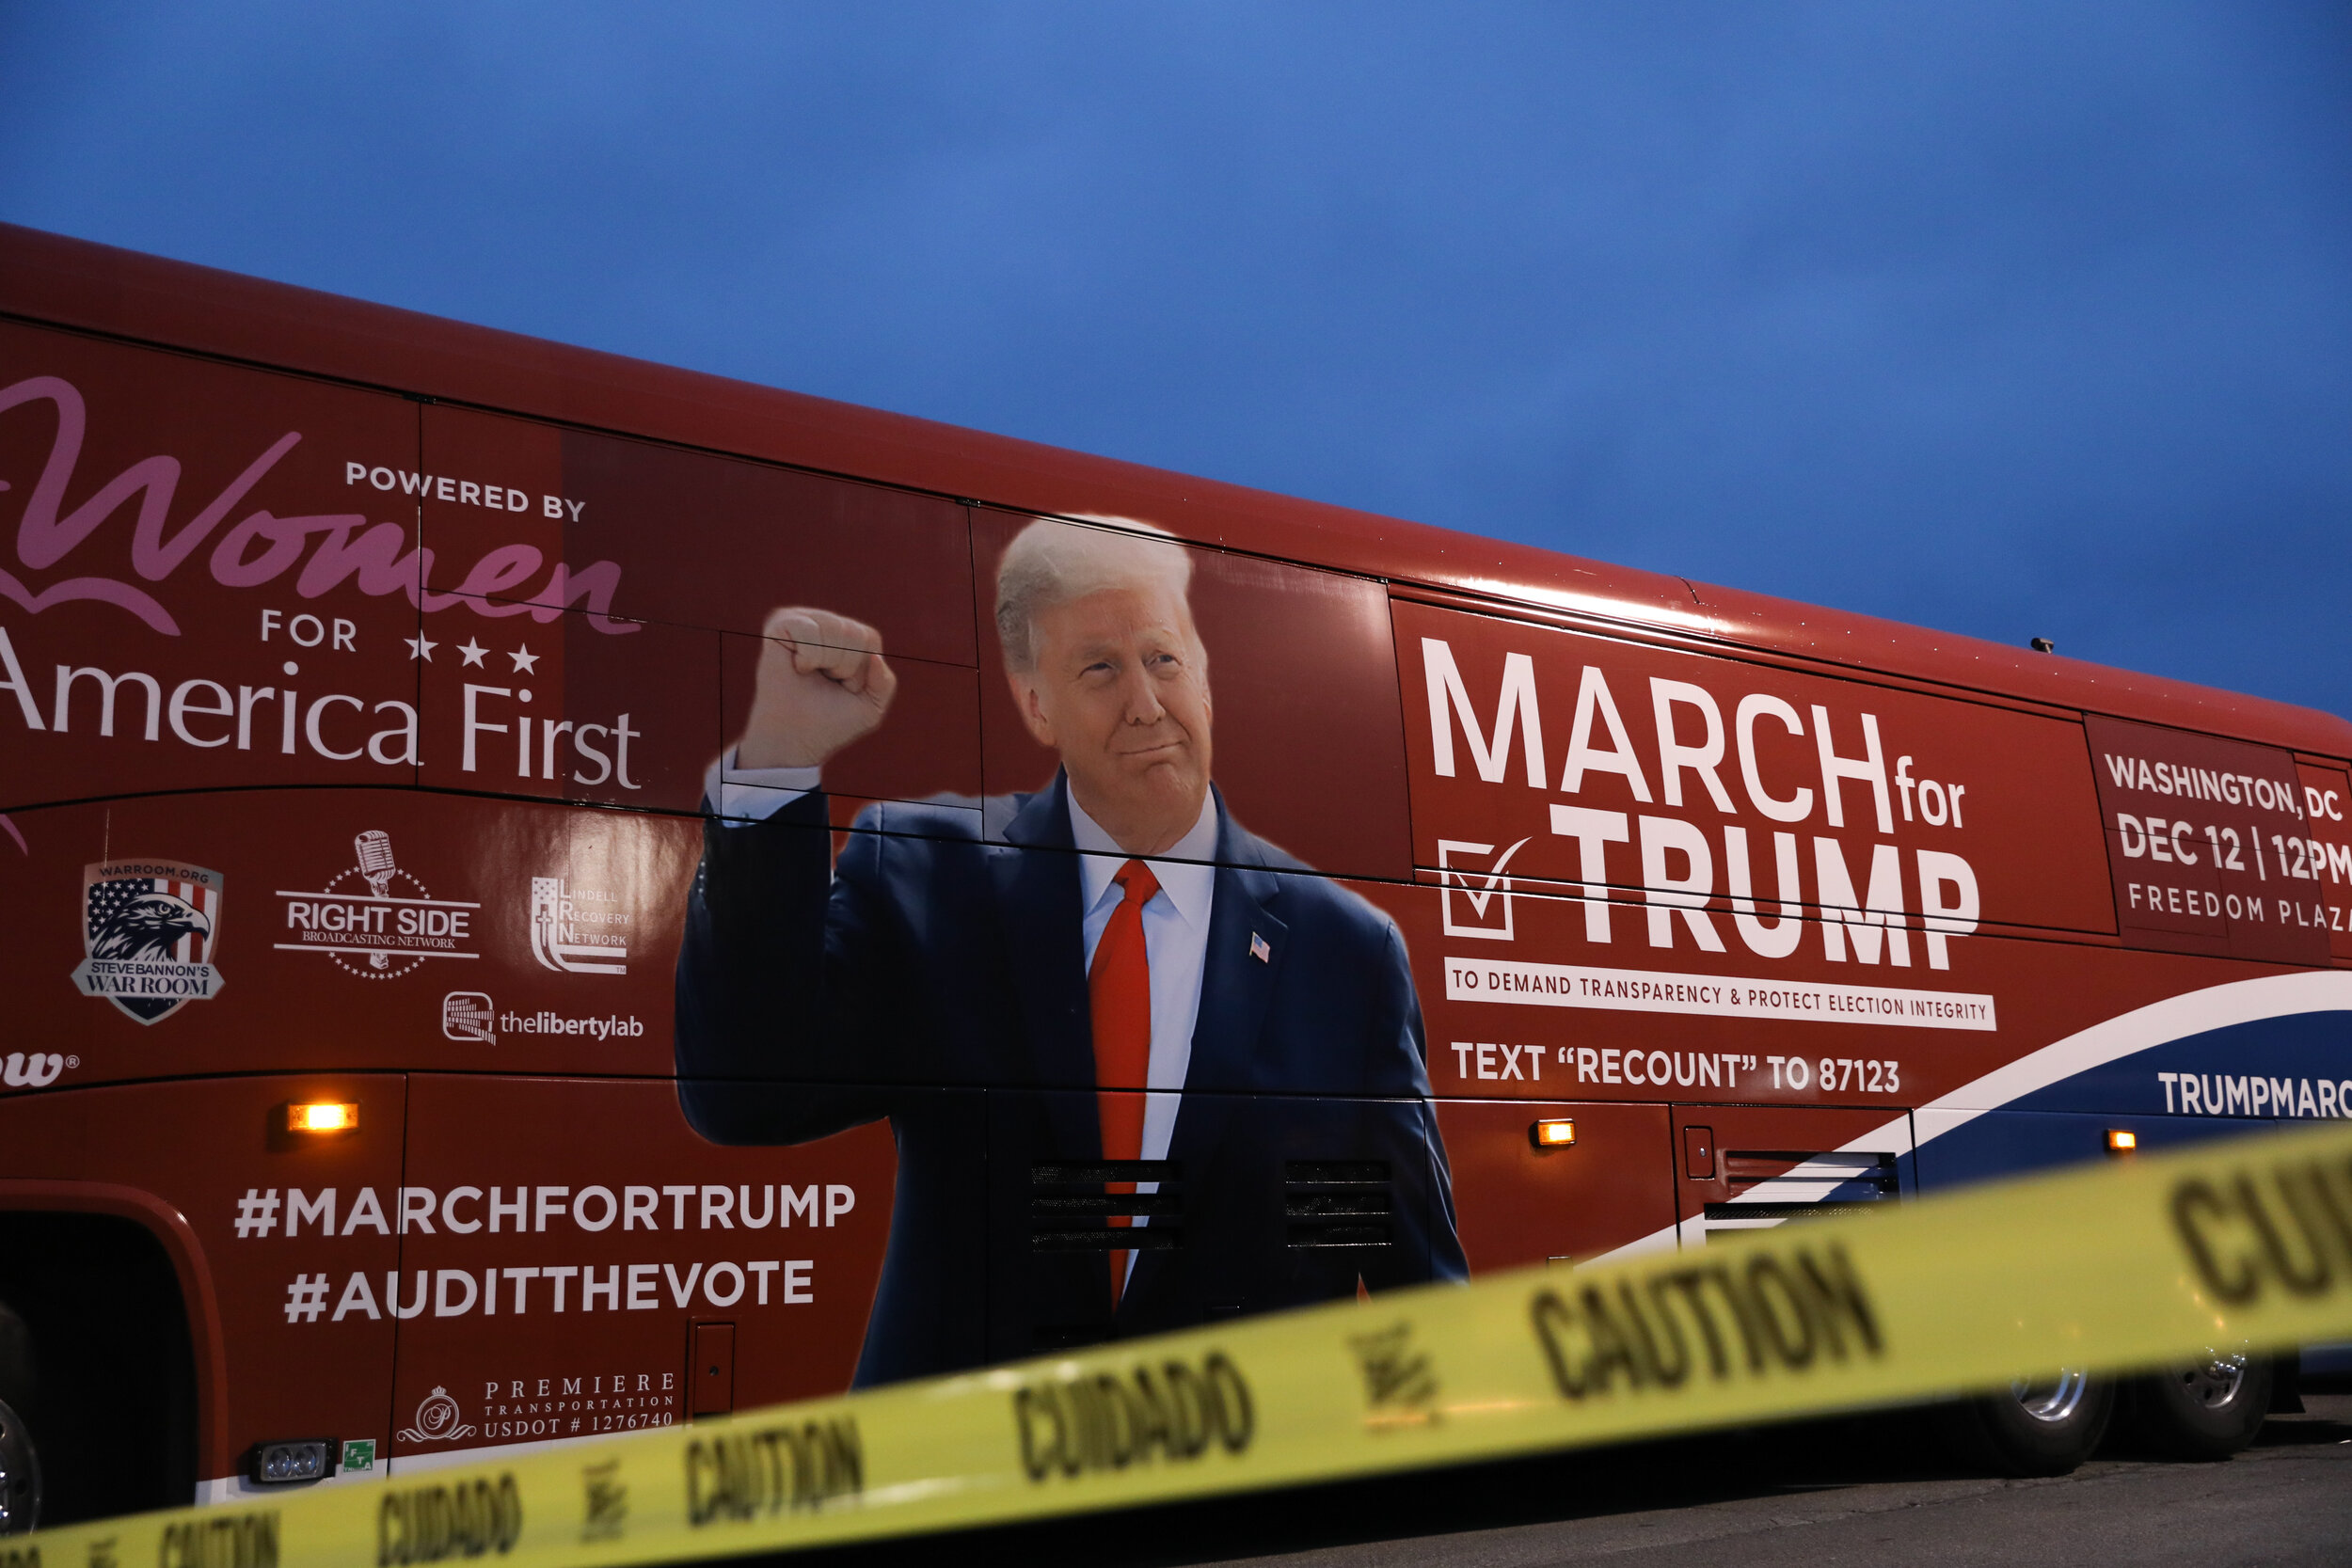  Grassroots supporters of President Donald J. Trump and conservative leaders gather in Macomb County, Michigan on December 8, 2020 to show their support for U.S. President Donald Trump. As part of a two week bus tour to rally support for the Presiden